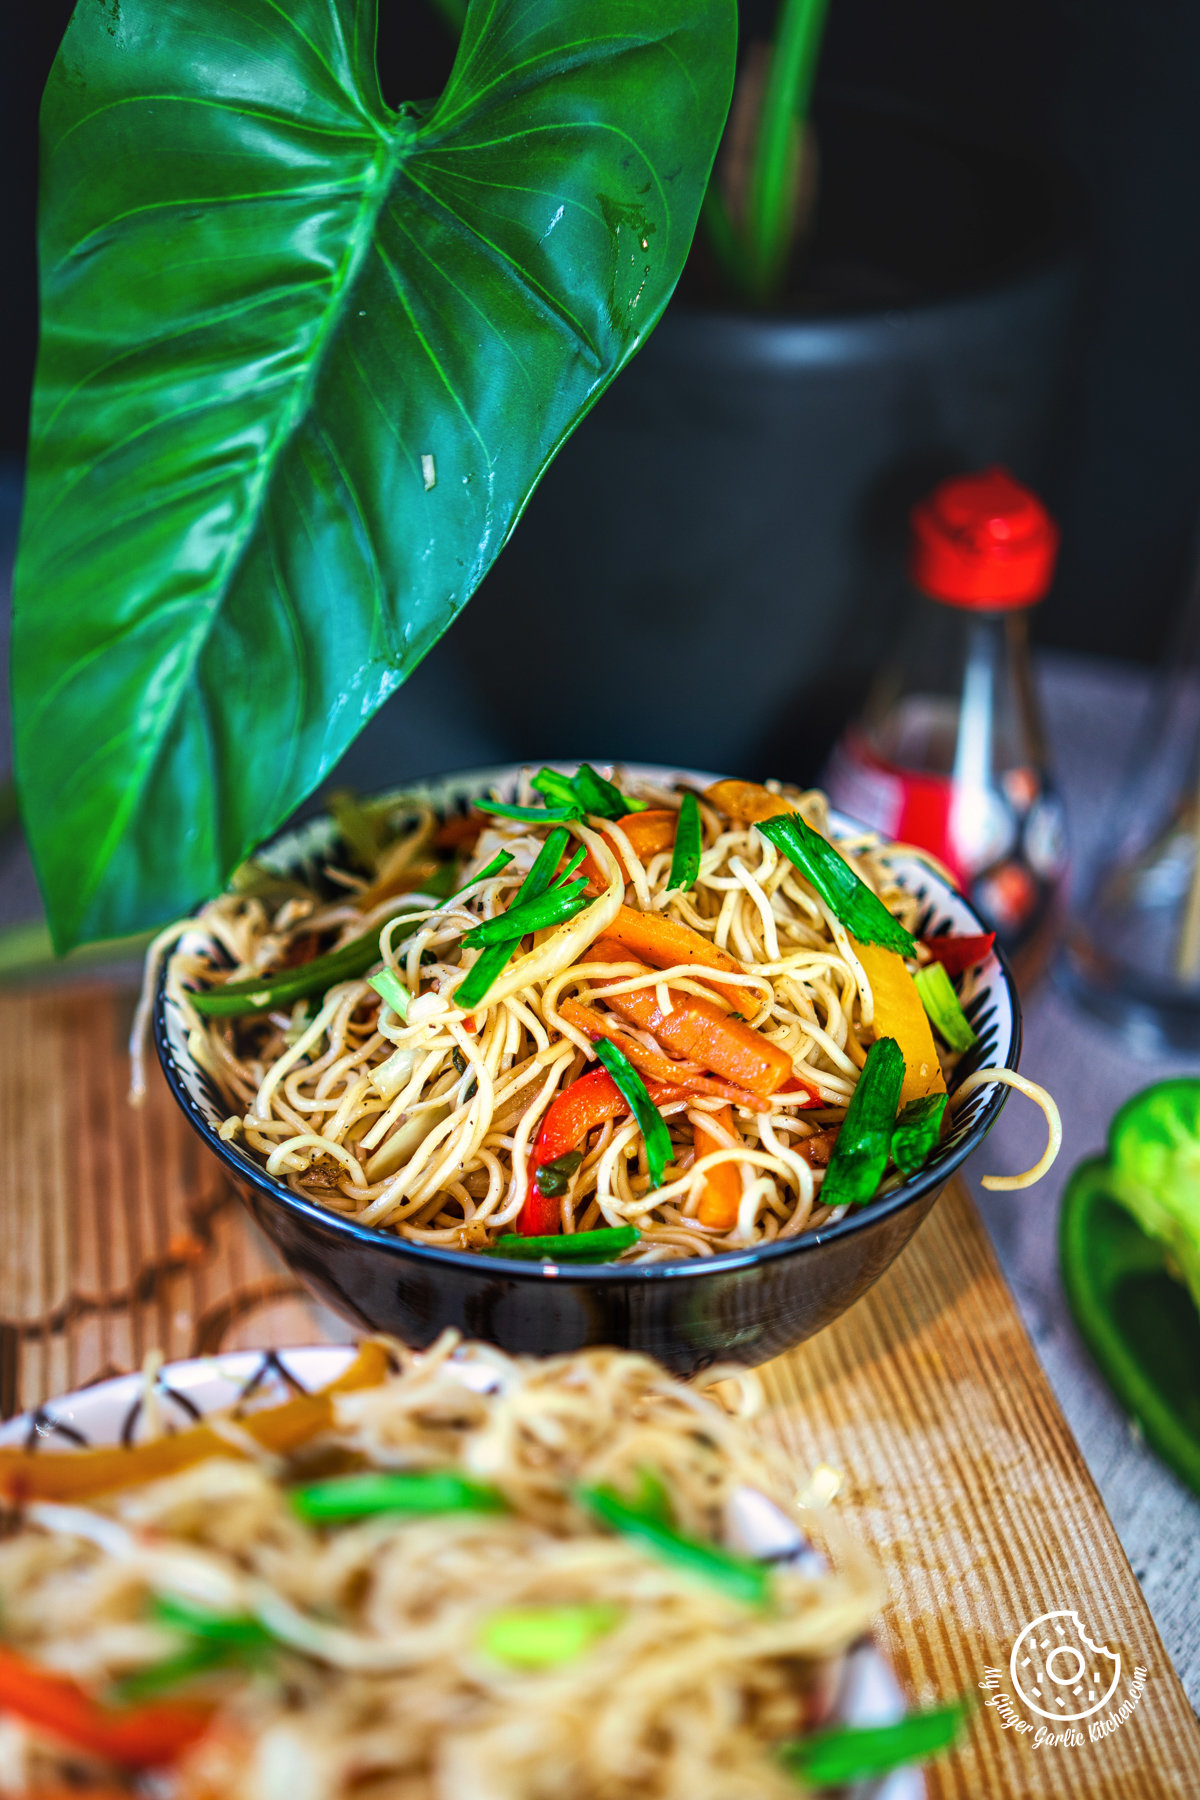 a closeup of vegetable hakka noodles served in a black bowl with a green plant in the background